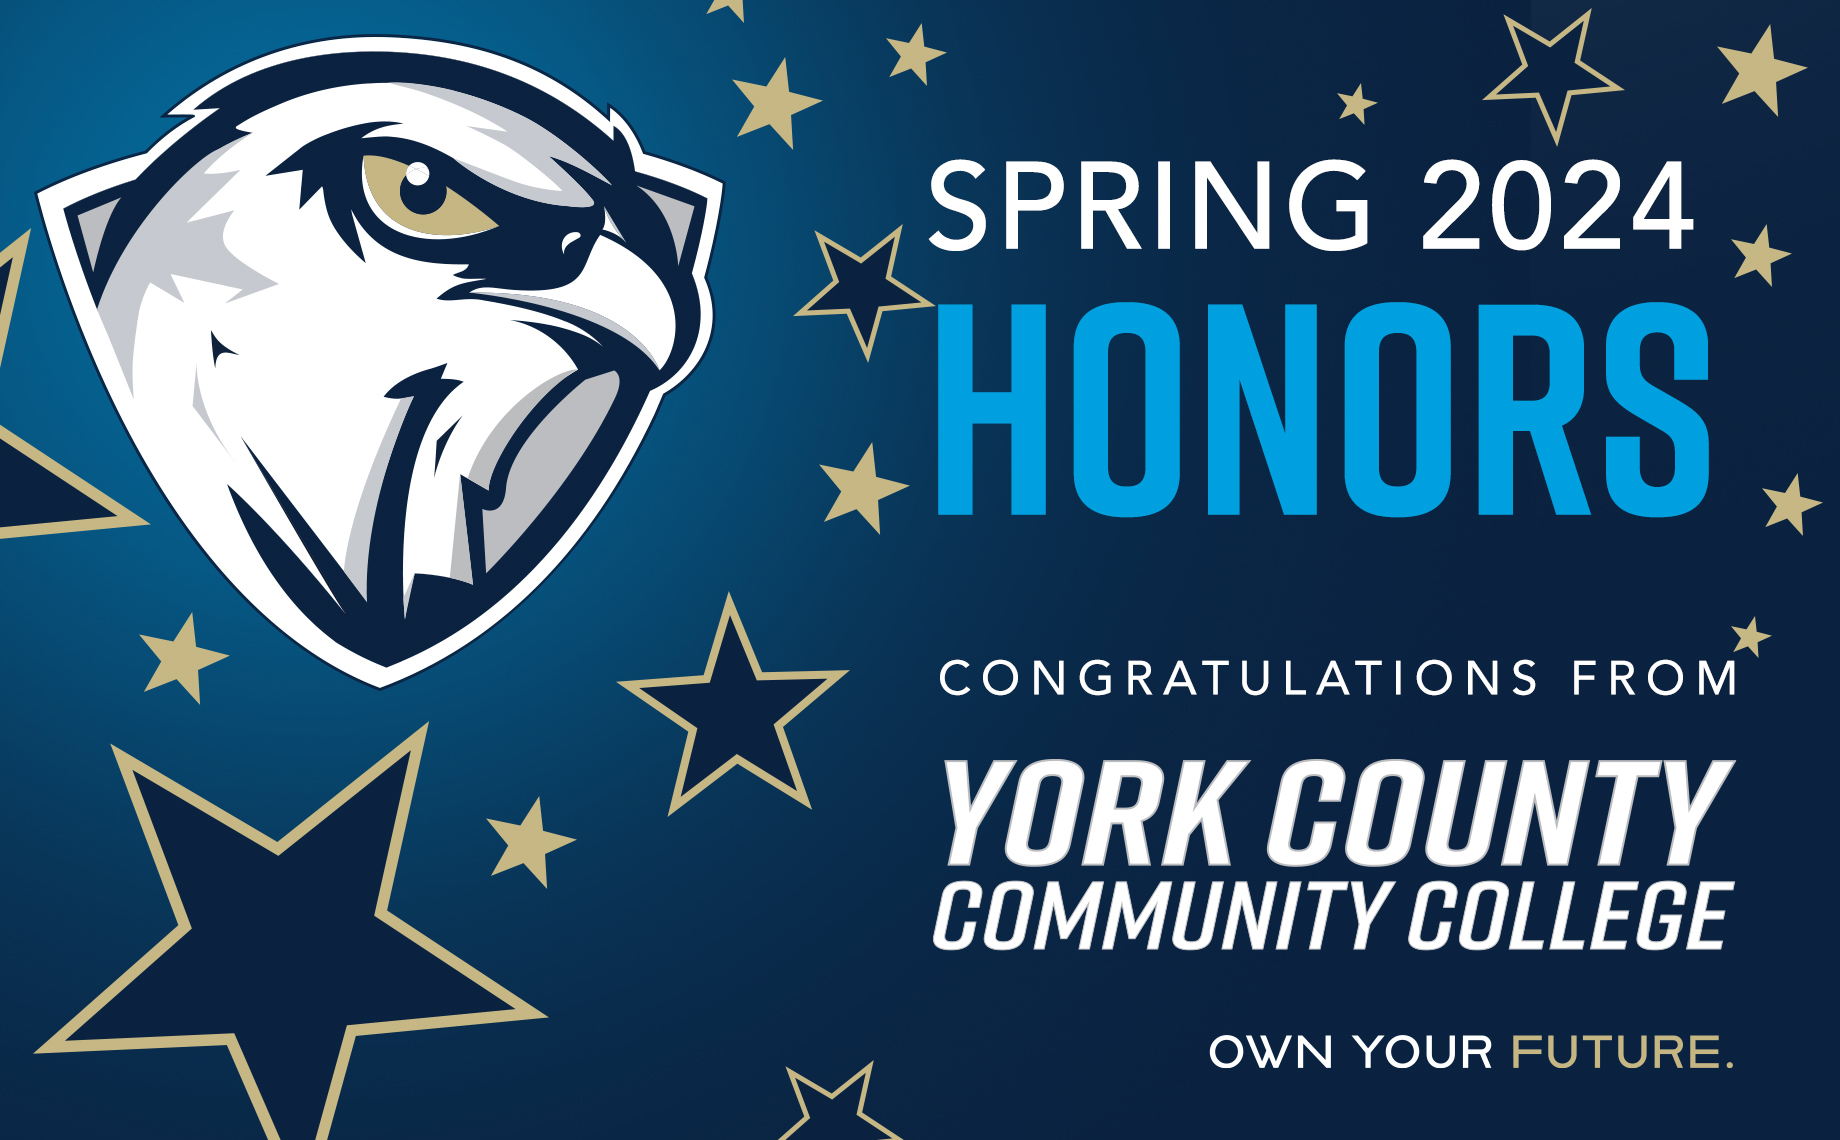 YCCC ANNOUNCES SPRING 2024 Honors